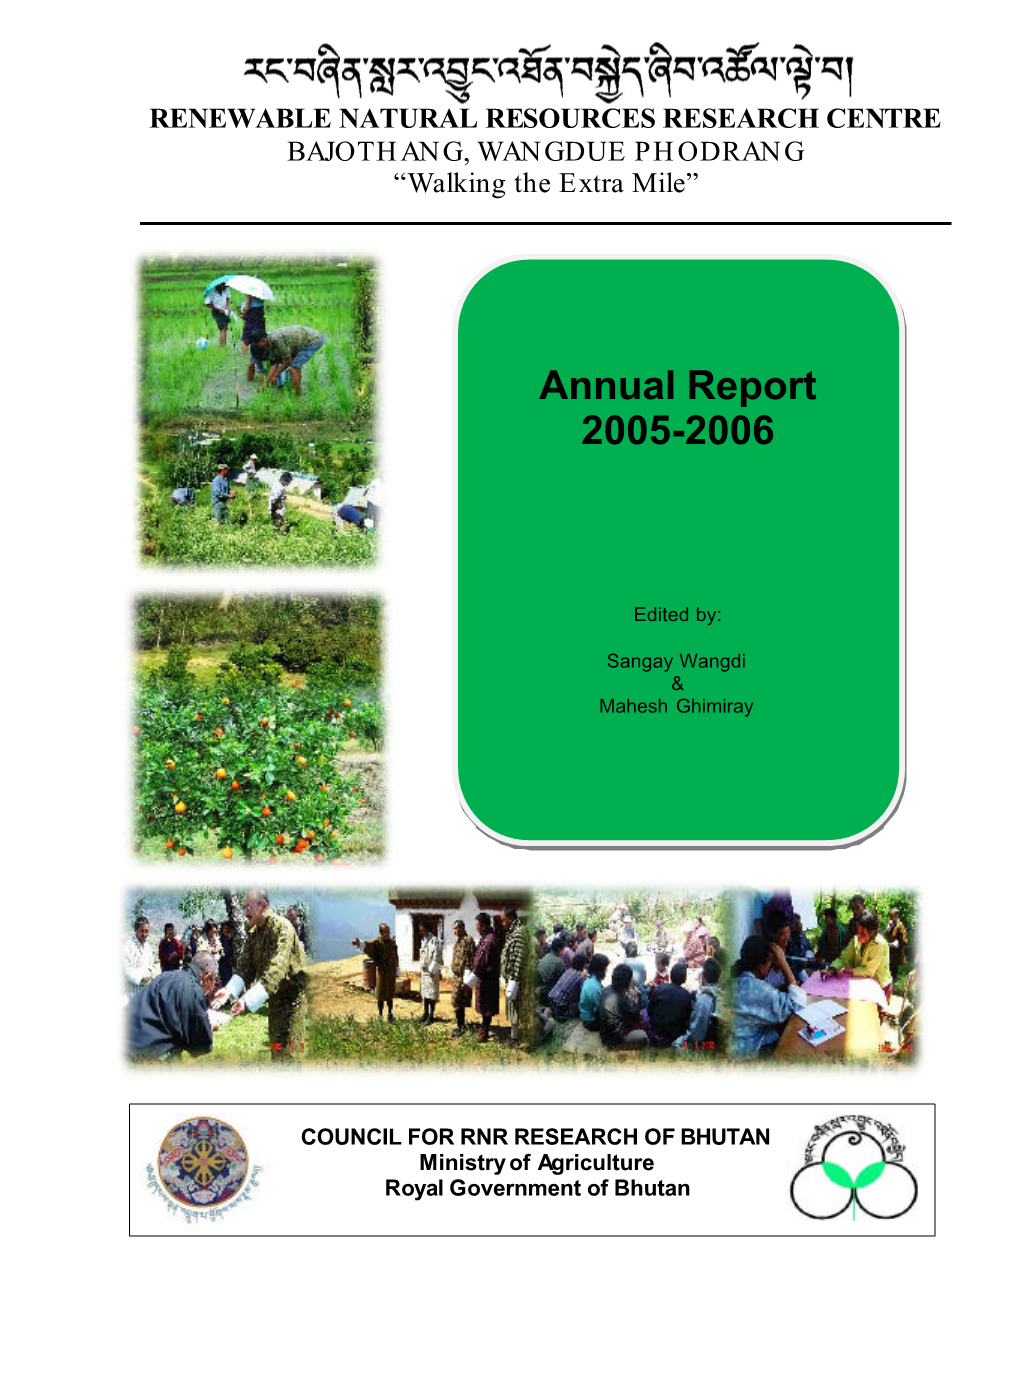 Annual Report New 05-06 13March